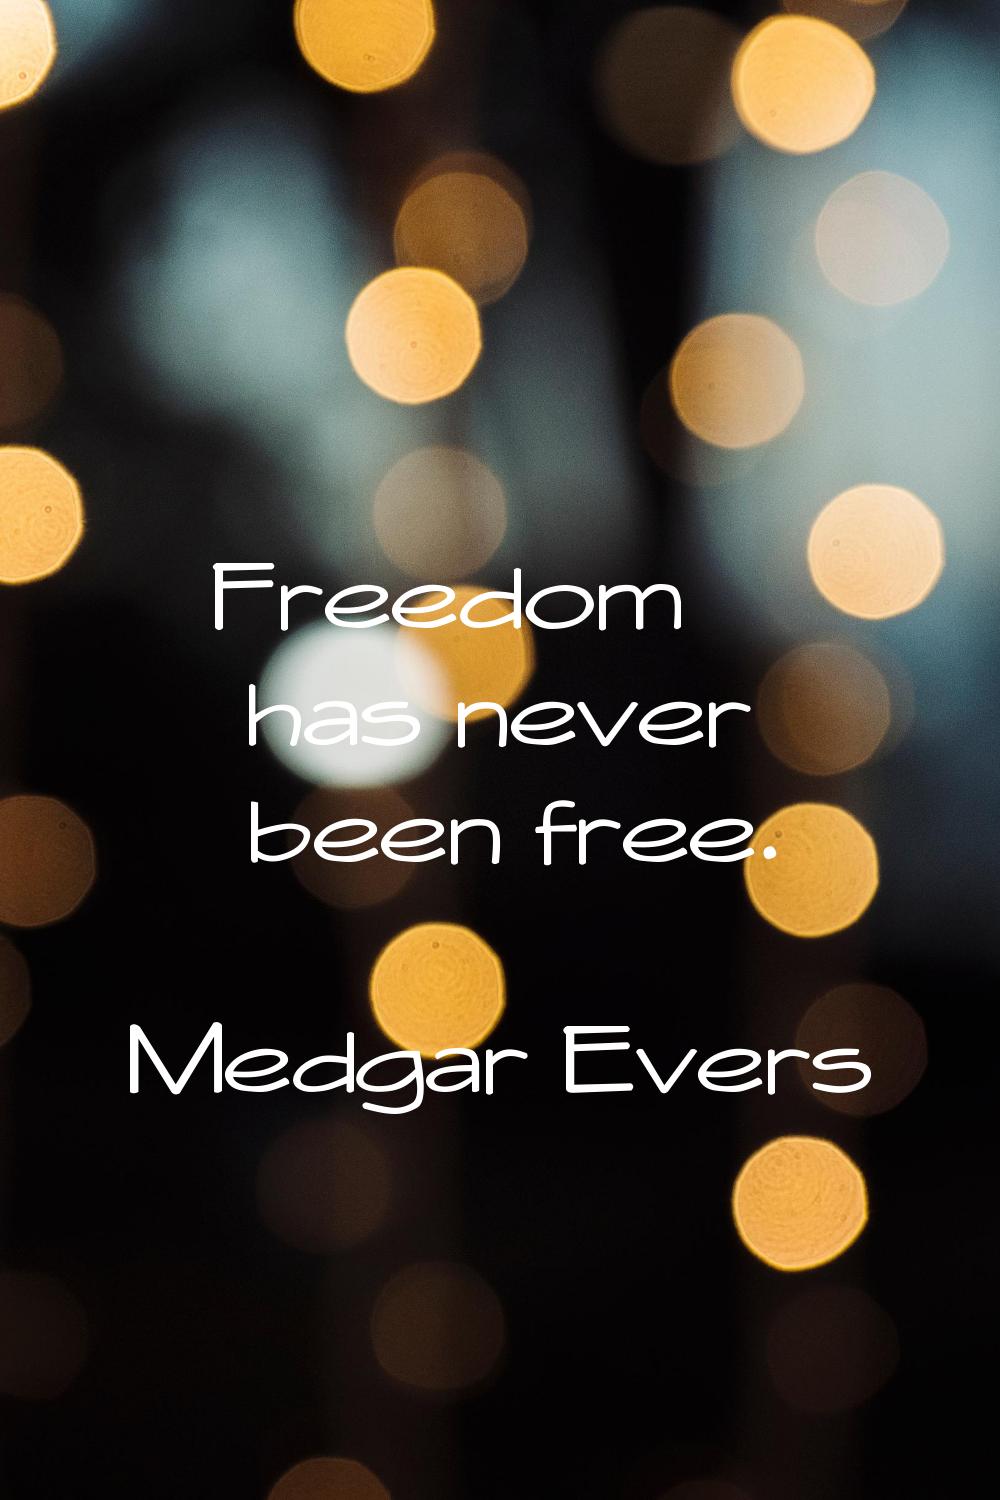 Freedom has never been free.